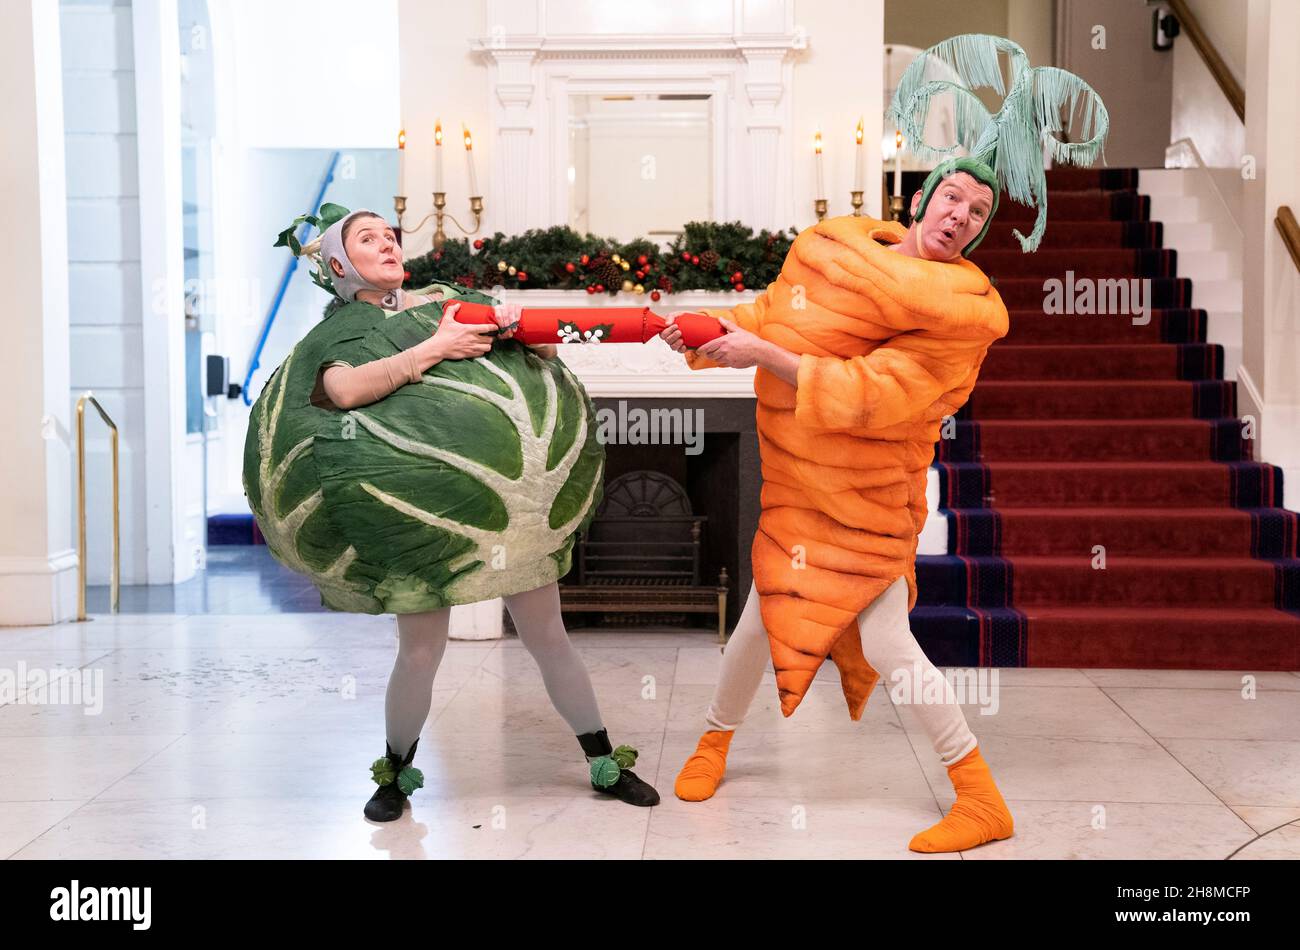 Cast members (from left) Sita Pieraccini and Richard Conlon get into character ahead of their show 'Christmas Dinner' at the Lyceum Theatre, Edinburgh, which will run from 6 December 2021 - 2 January 2022. Picture date: Tuesday November 30, 2021. Stock Photo